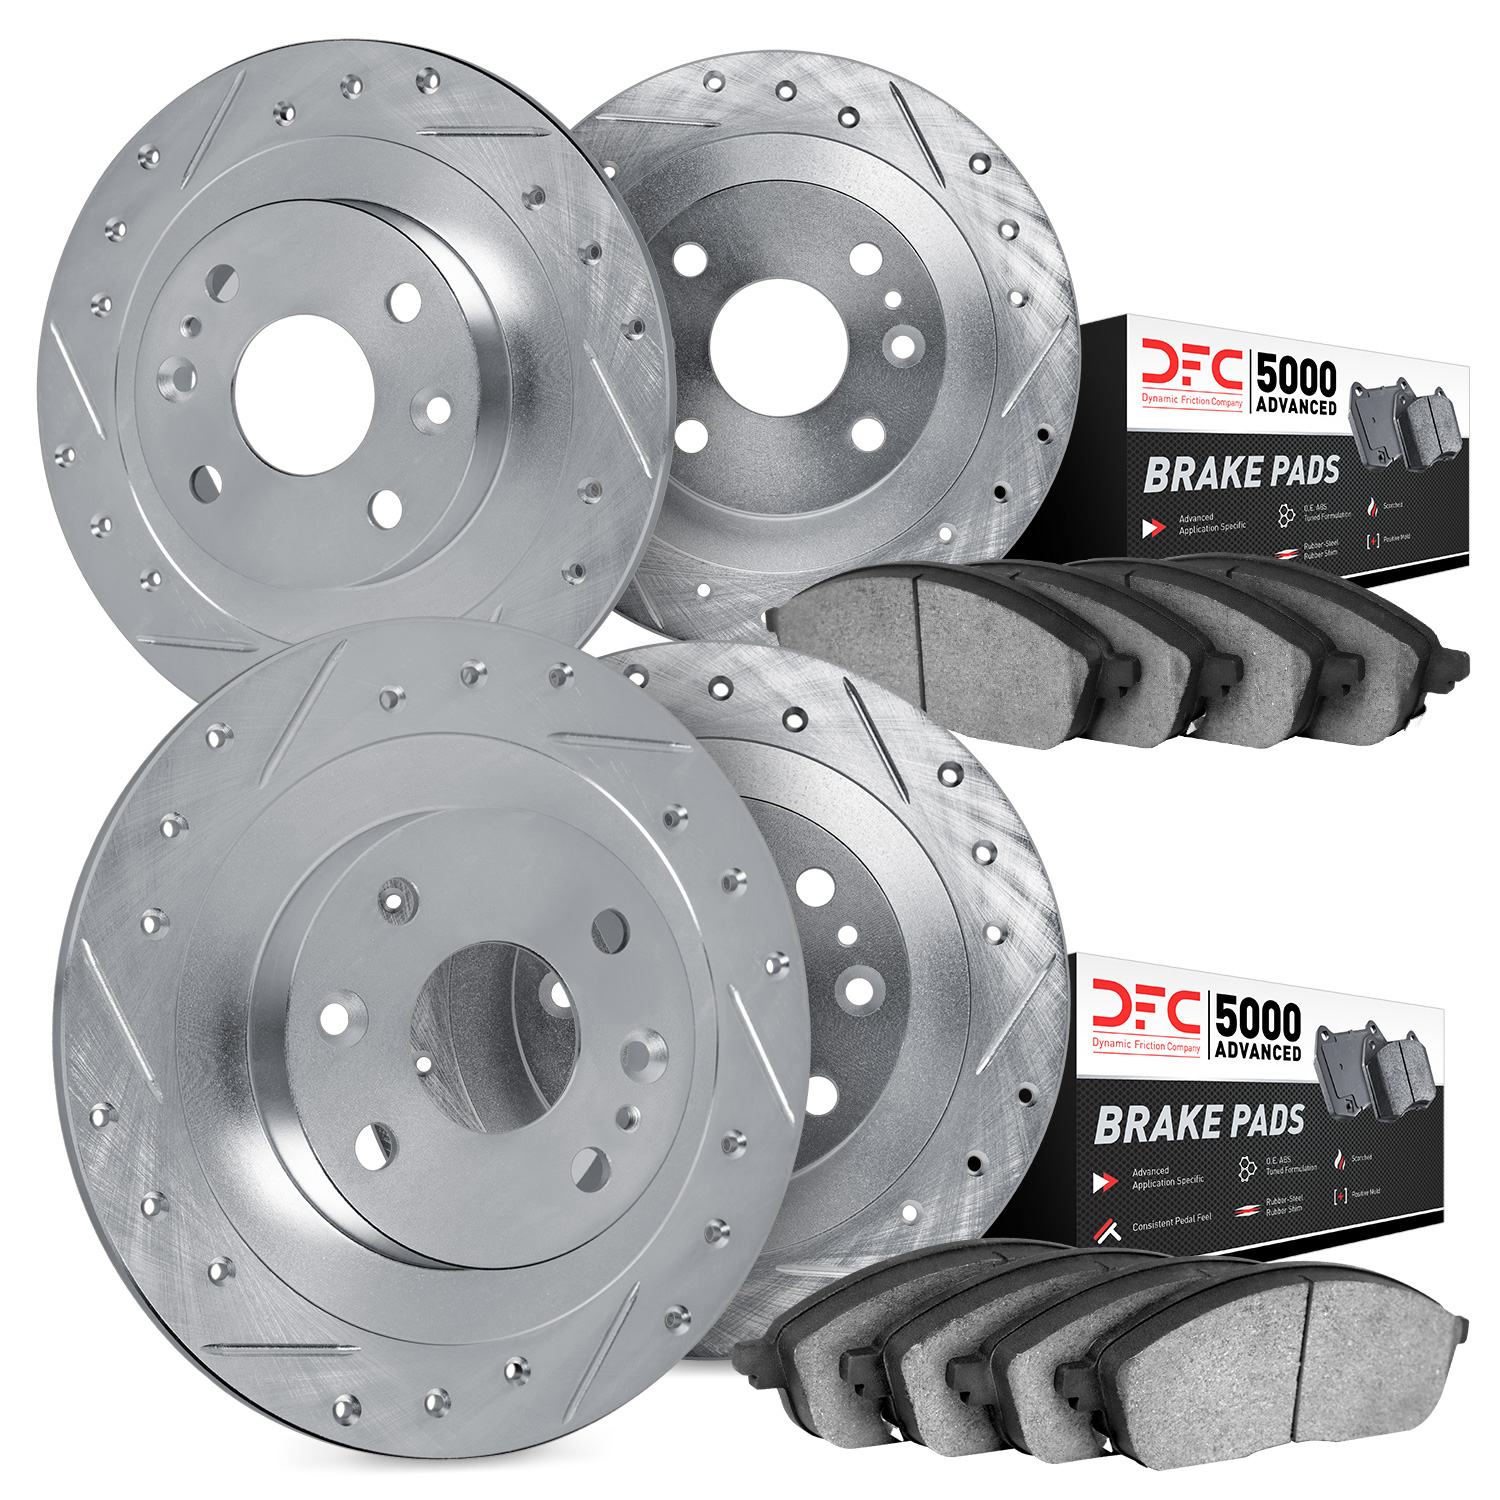 7504-67071 Drilled/Slotted Brake Rotors w/5000 Advanced Brake Pads Kit [Silver], 1982-1983 Infiniti/Nissan, Position: Front and